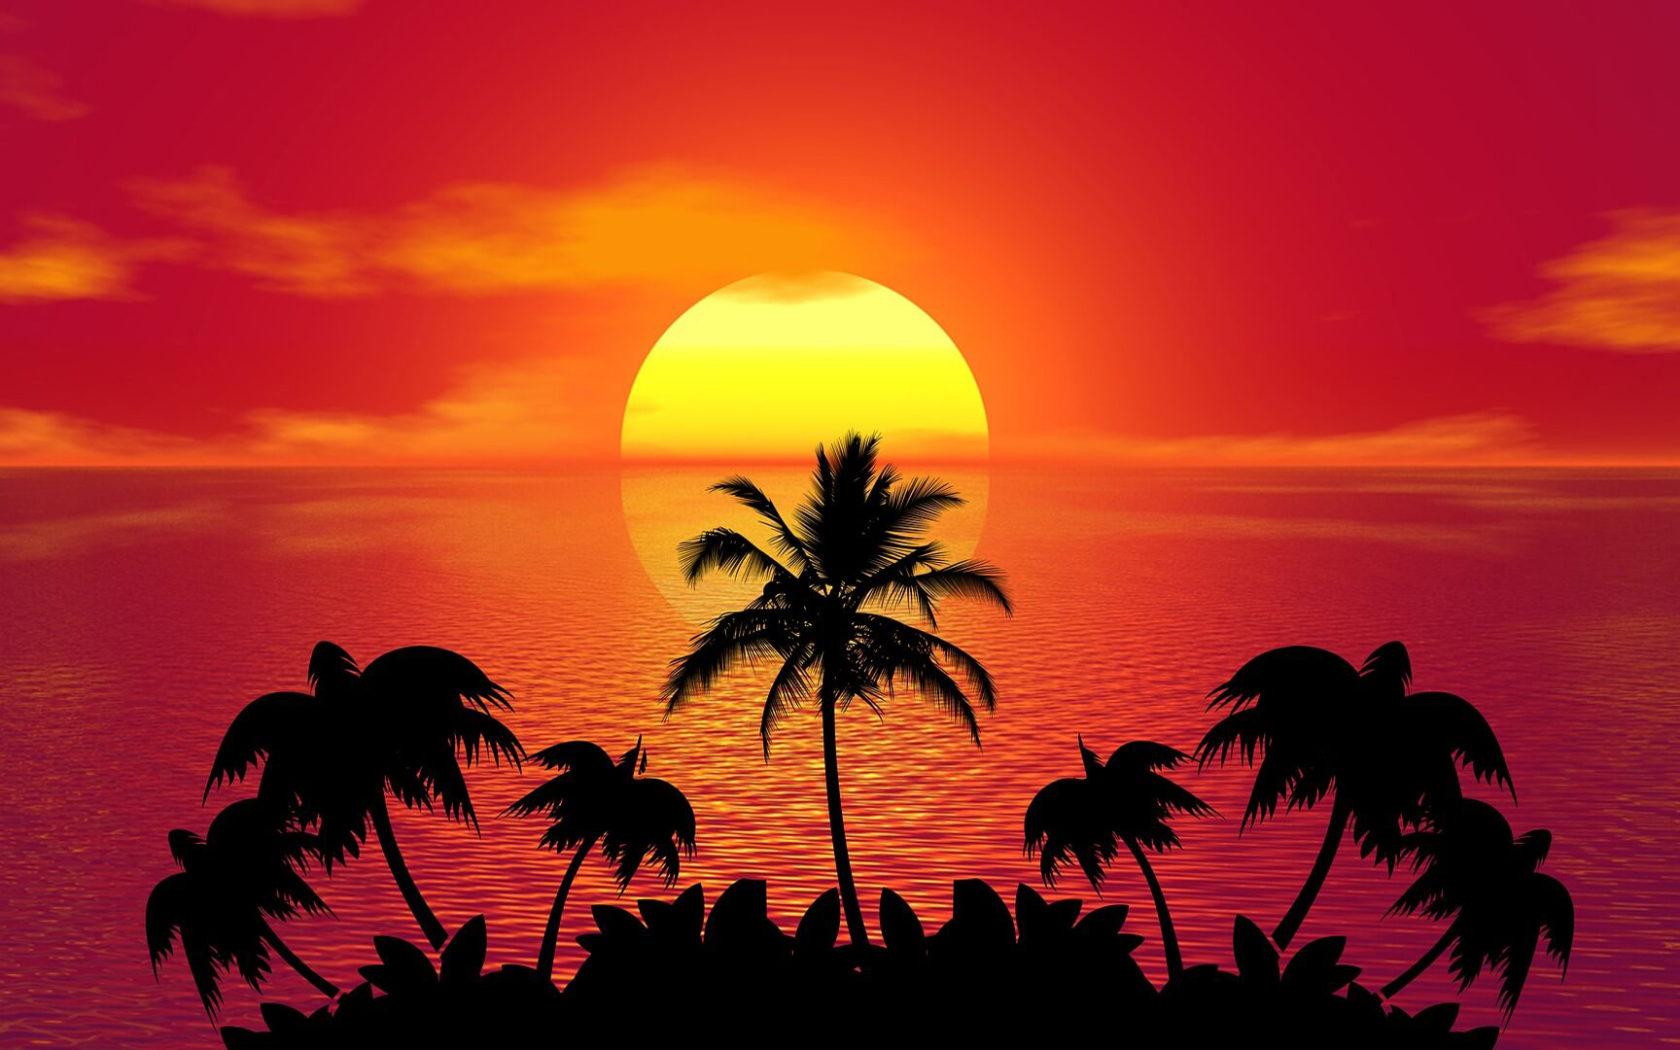 Tropical Island Sunset Wallpapers Top Free Tropical Island Sunset Backgrounds Wallpaperaccess 